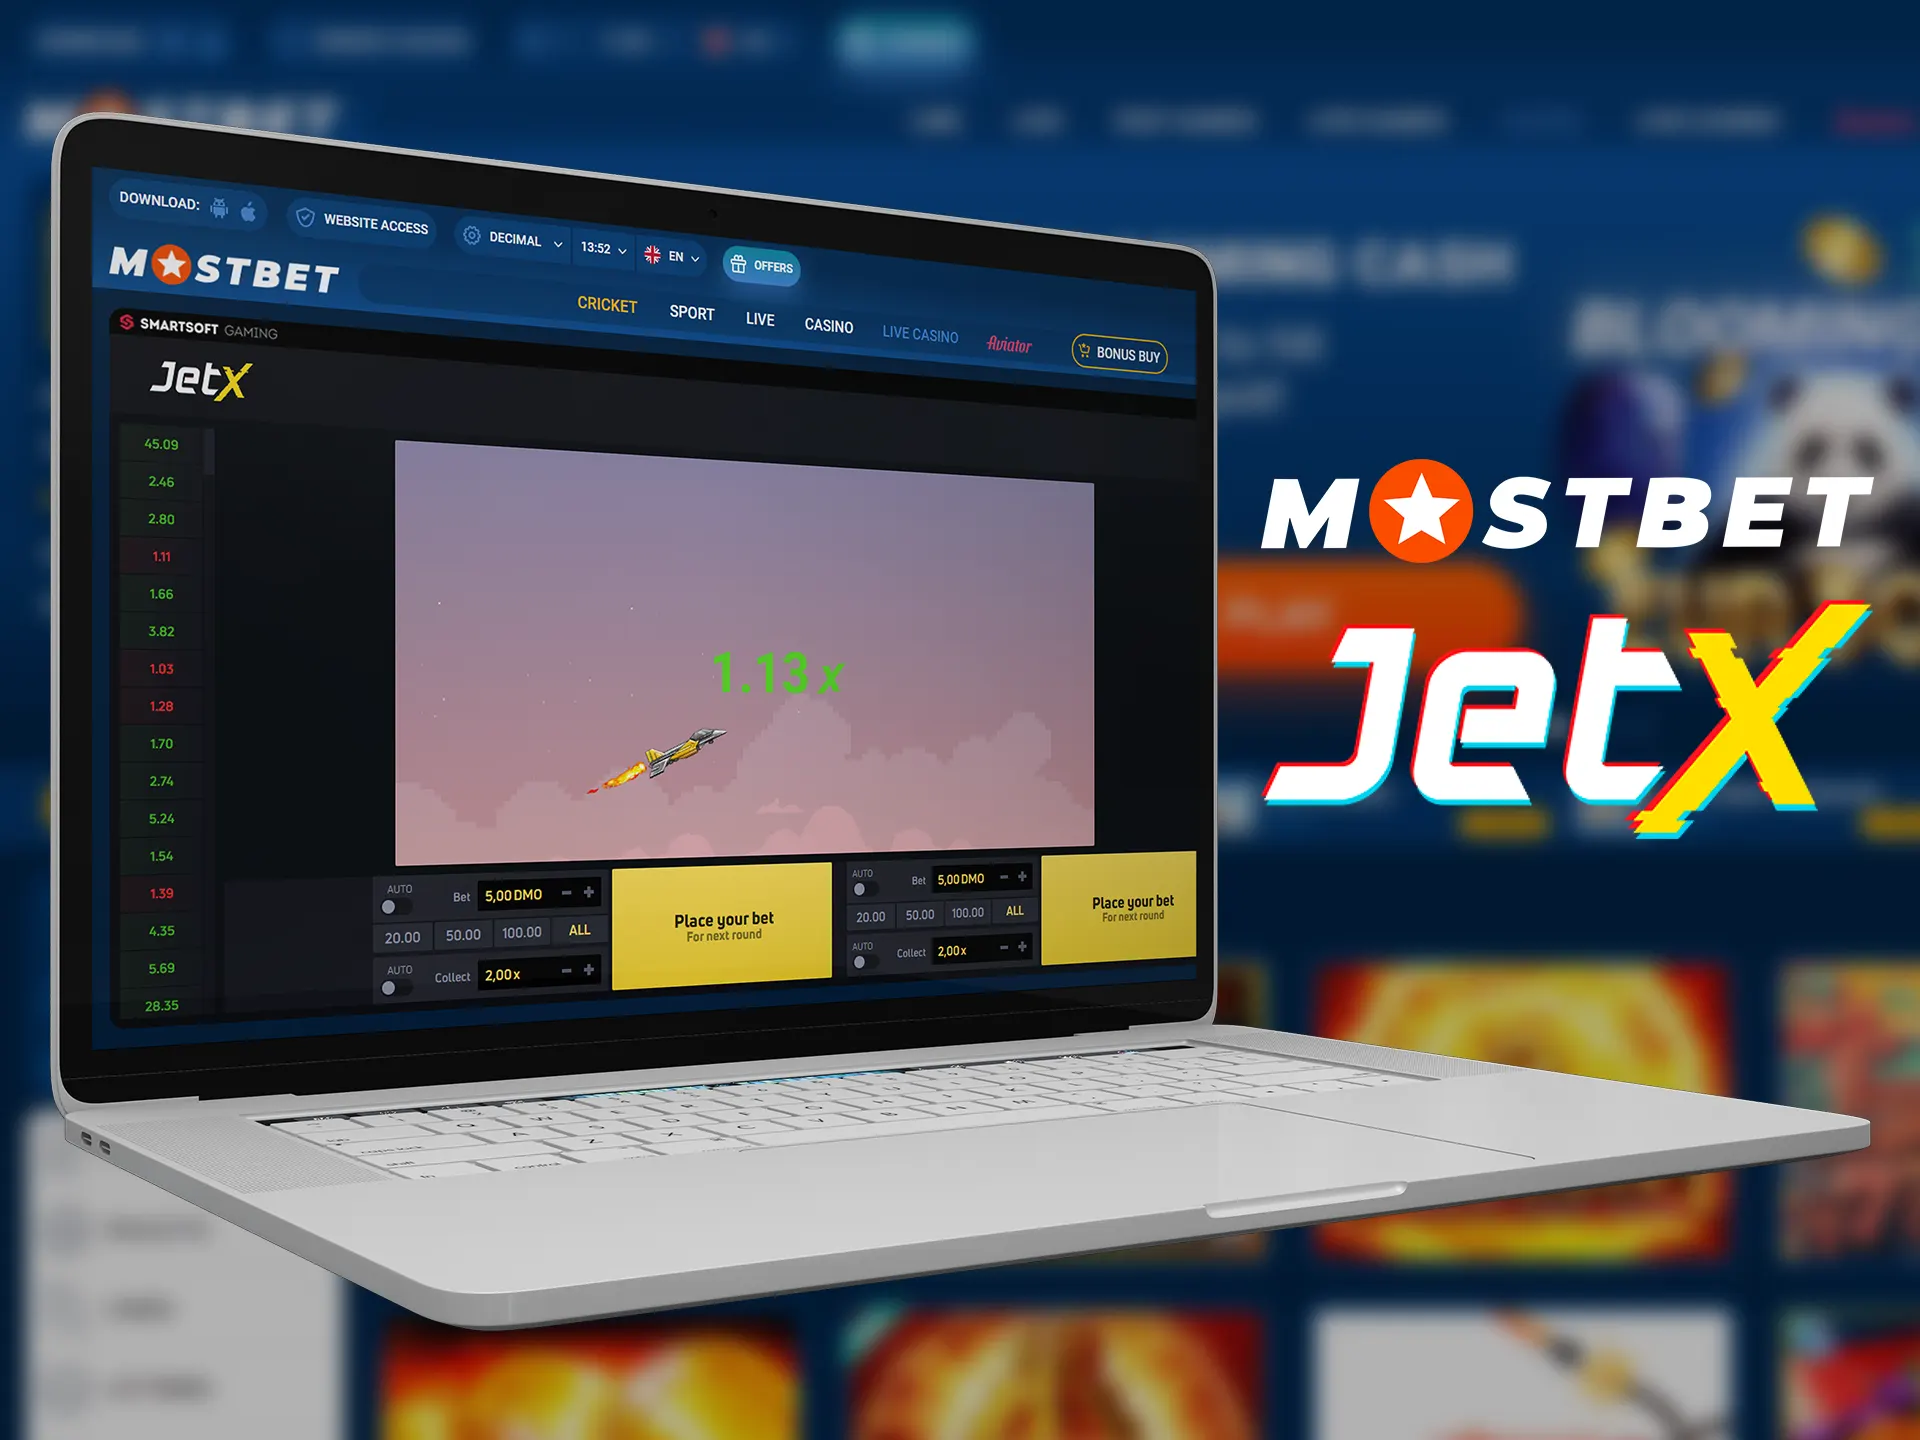 Mostbet is one of the best places for playing the JetX game.